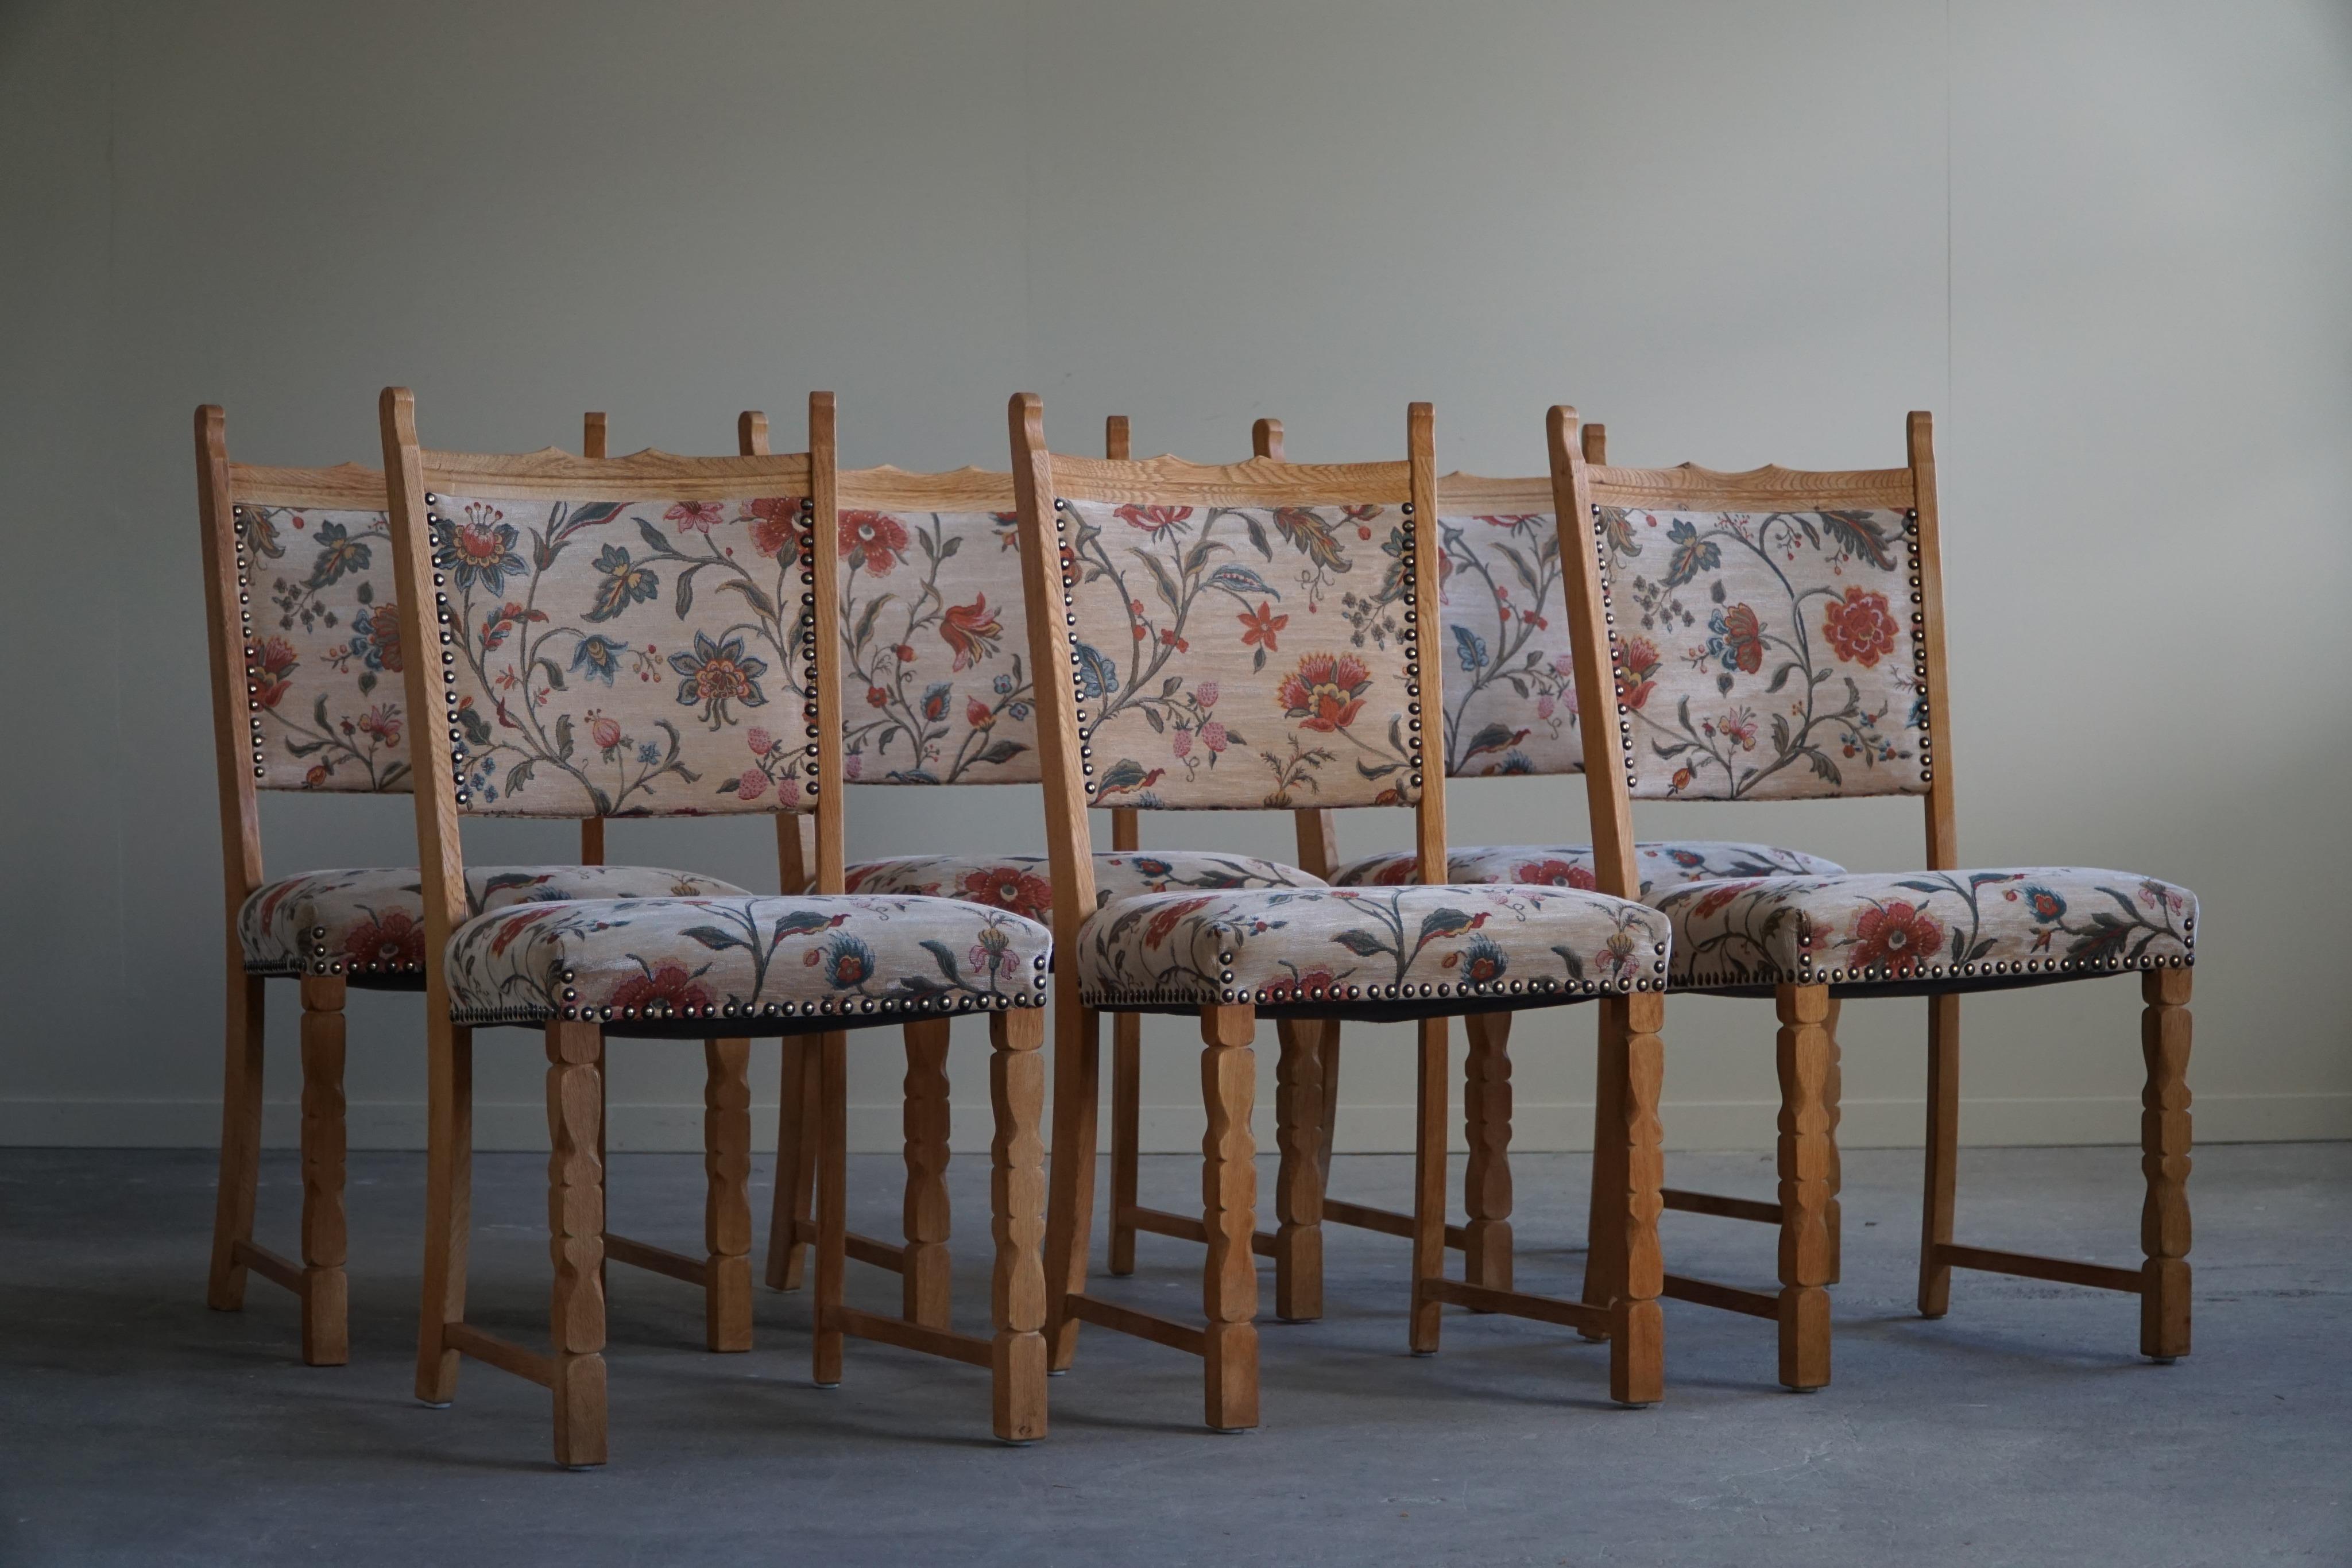 A Set of 6 Dining Room Chairs in Oak & Fabric by a Danish Cabinetmaker, 1950s For Sale 7